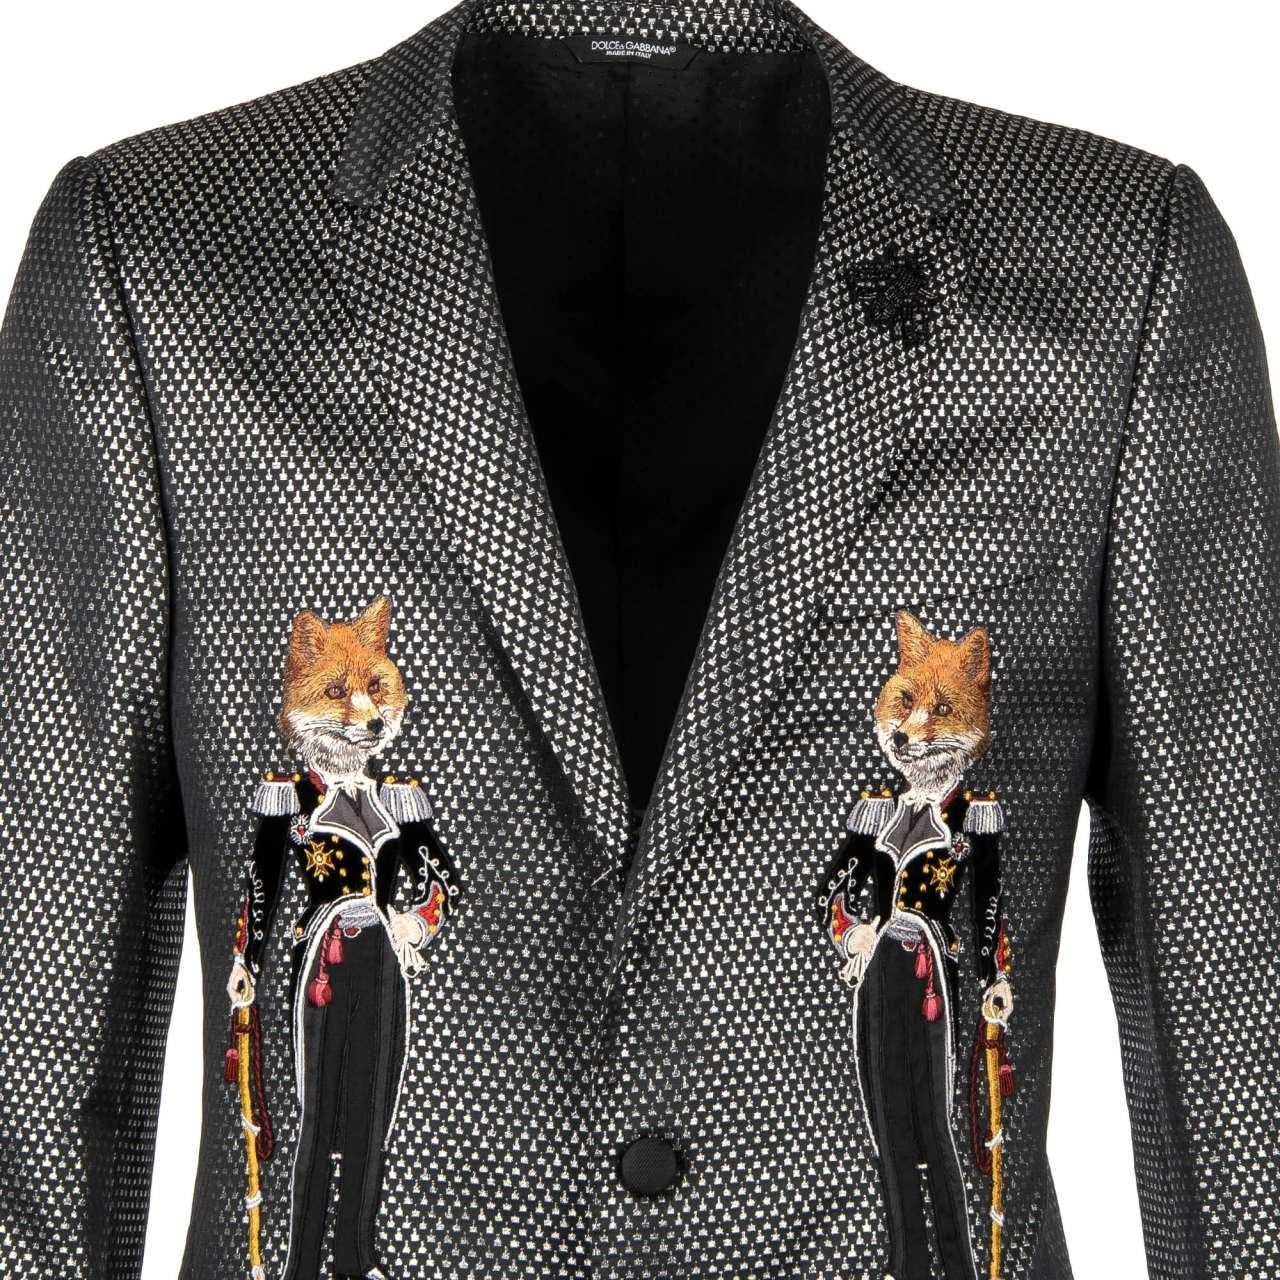 - Textured shiny lurex jacket / blazer MARTINI in silver and black with embroidered Uniform Foxes and Crystals Bee by DOLCE & GABBANA - RUNWAY - Dolce&Gabbana Fashion Show - Former RRP: EUR 2.750 - Made In Italy - New with Tag - Slim Fit - Model: